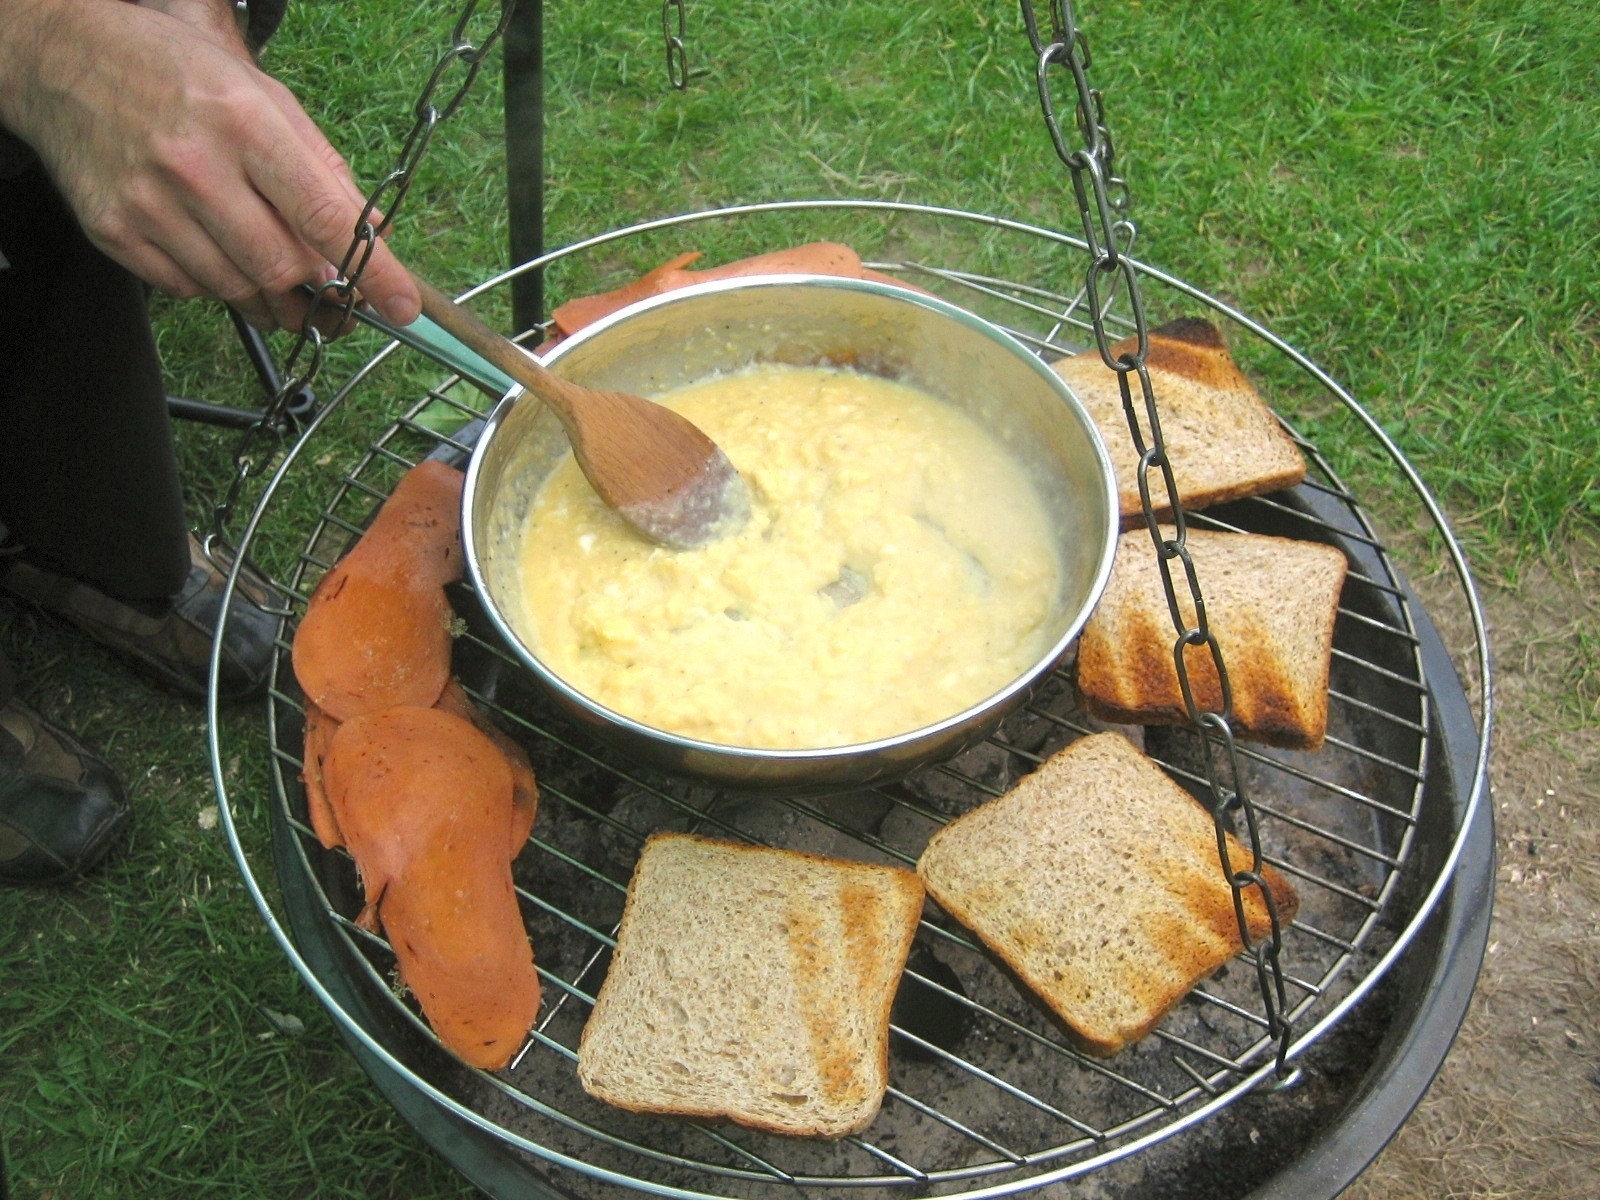 Breakfast cooking on the tripod grill